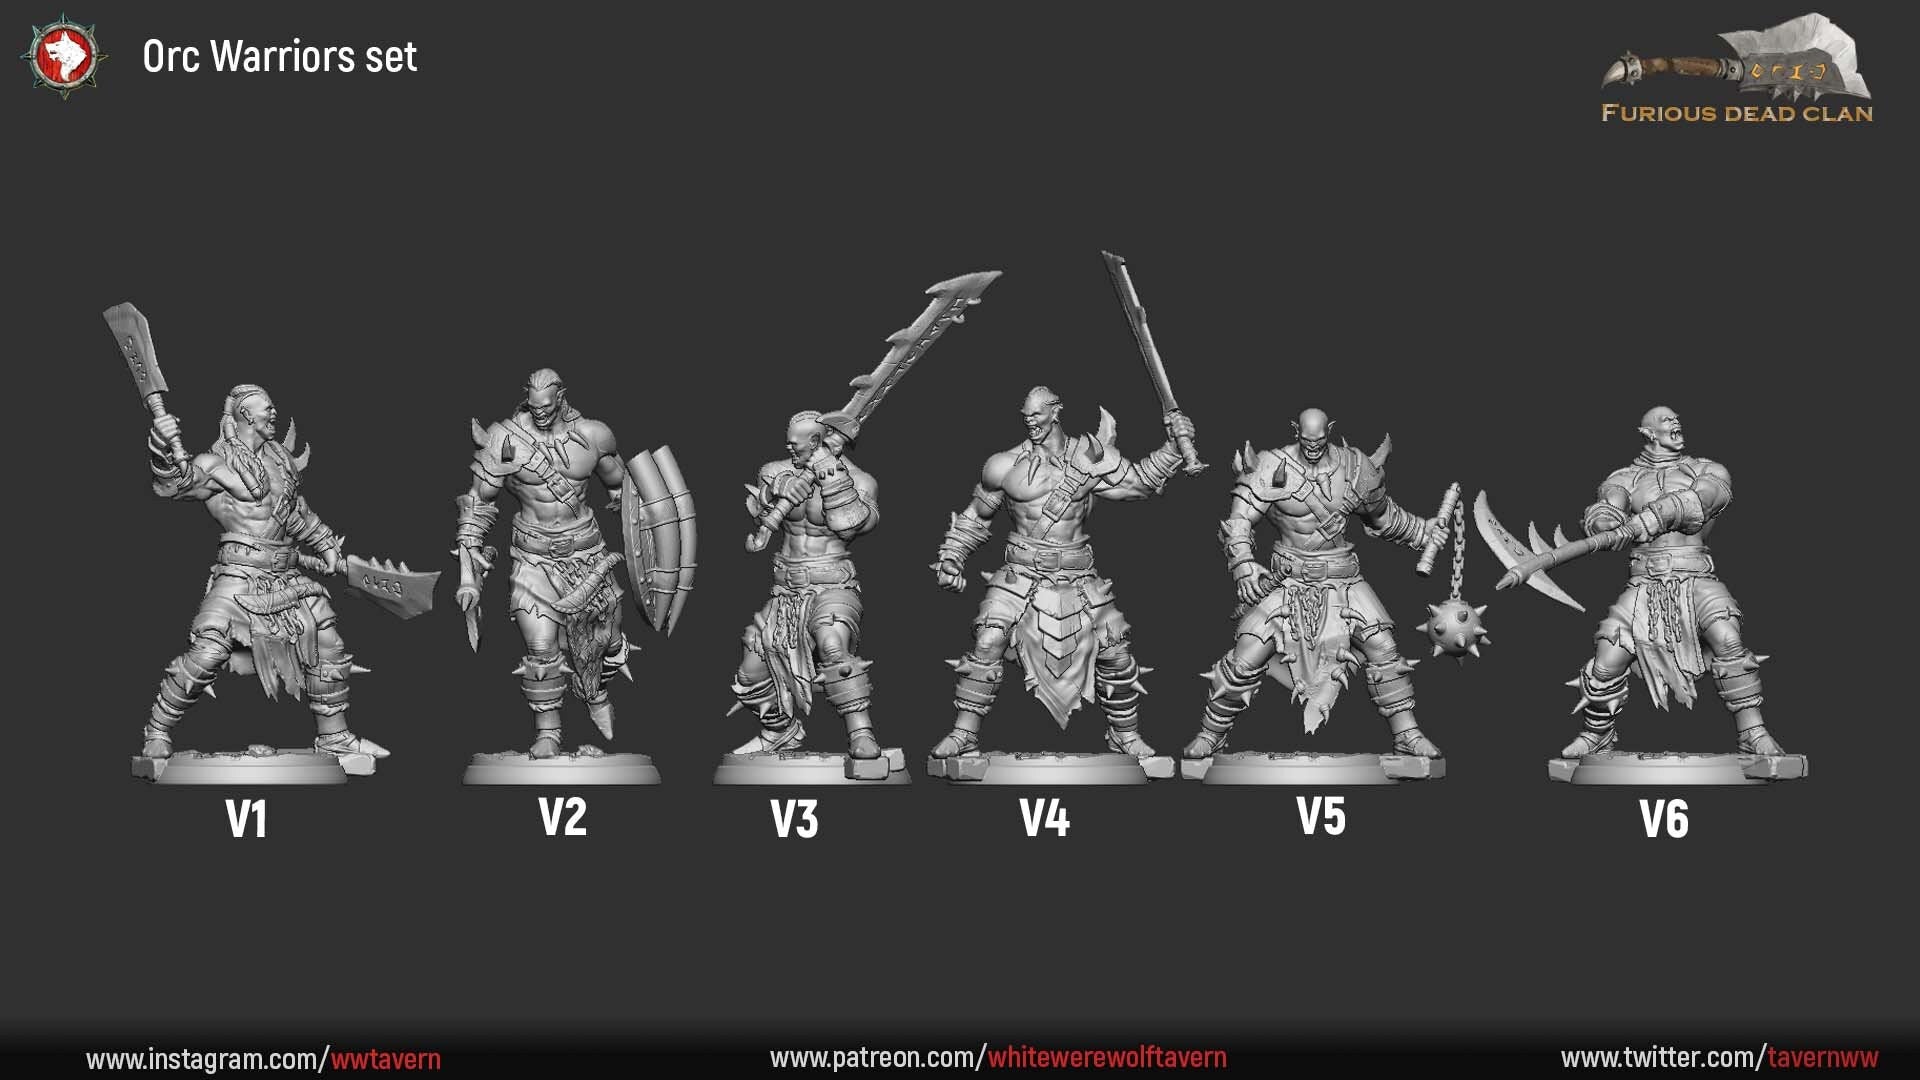 Orc Warrior Warband | Six Poses | Resin 3D Printed Miniature | White Werewolf Tavern | RPG | D&D | DnD